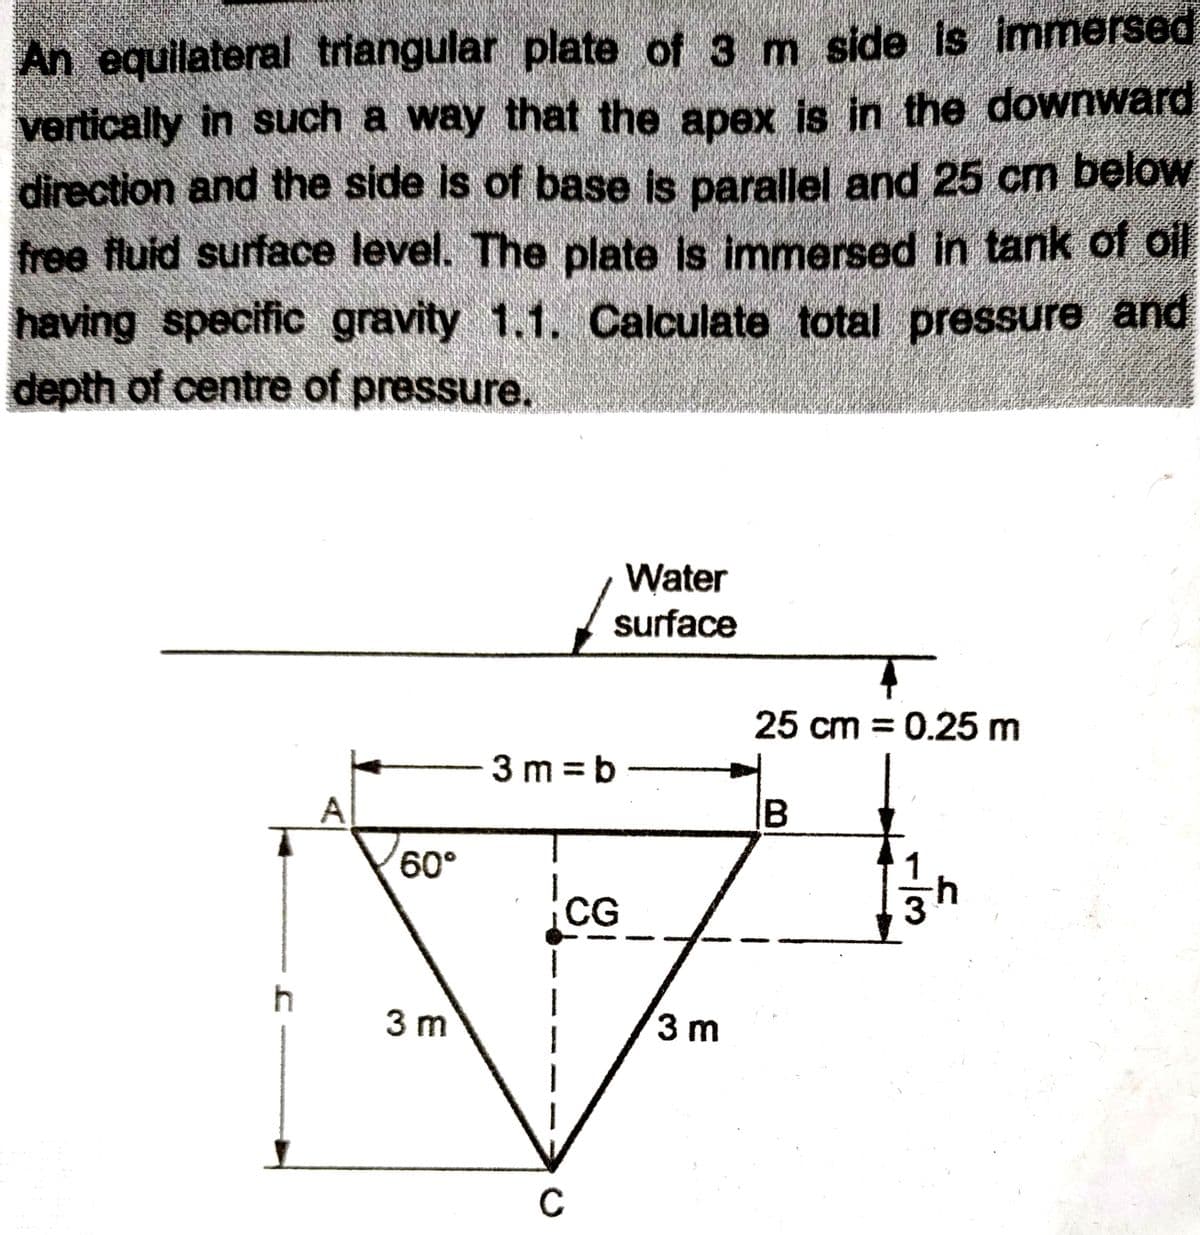 An equilateral triangular plate of 3 m side is immersed
vertically in such a way that the apex is in the downward
direction and the side is of base is parallel and 25 cm below
free fluid surface level. The plate is immersed in tank of oil
having specific gravity 1.1. Calculate total pressure and
culate total
depth of centre of pressure.
Water
surface
25 cm = 0.25 m
A
B
h
60°
3 m
3m=b
T
CG
I
C
3 m
3